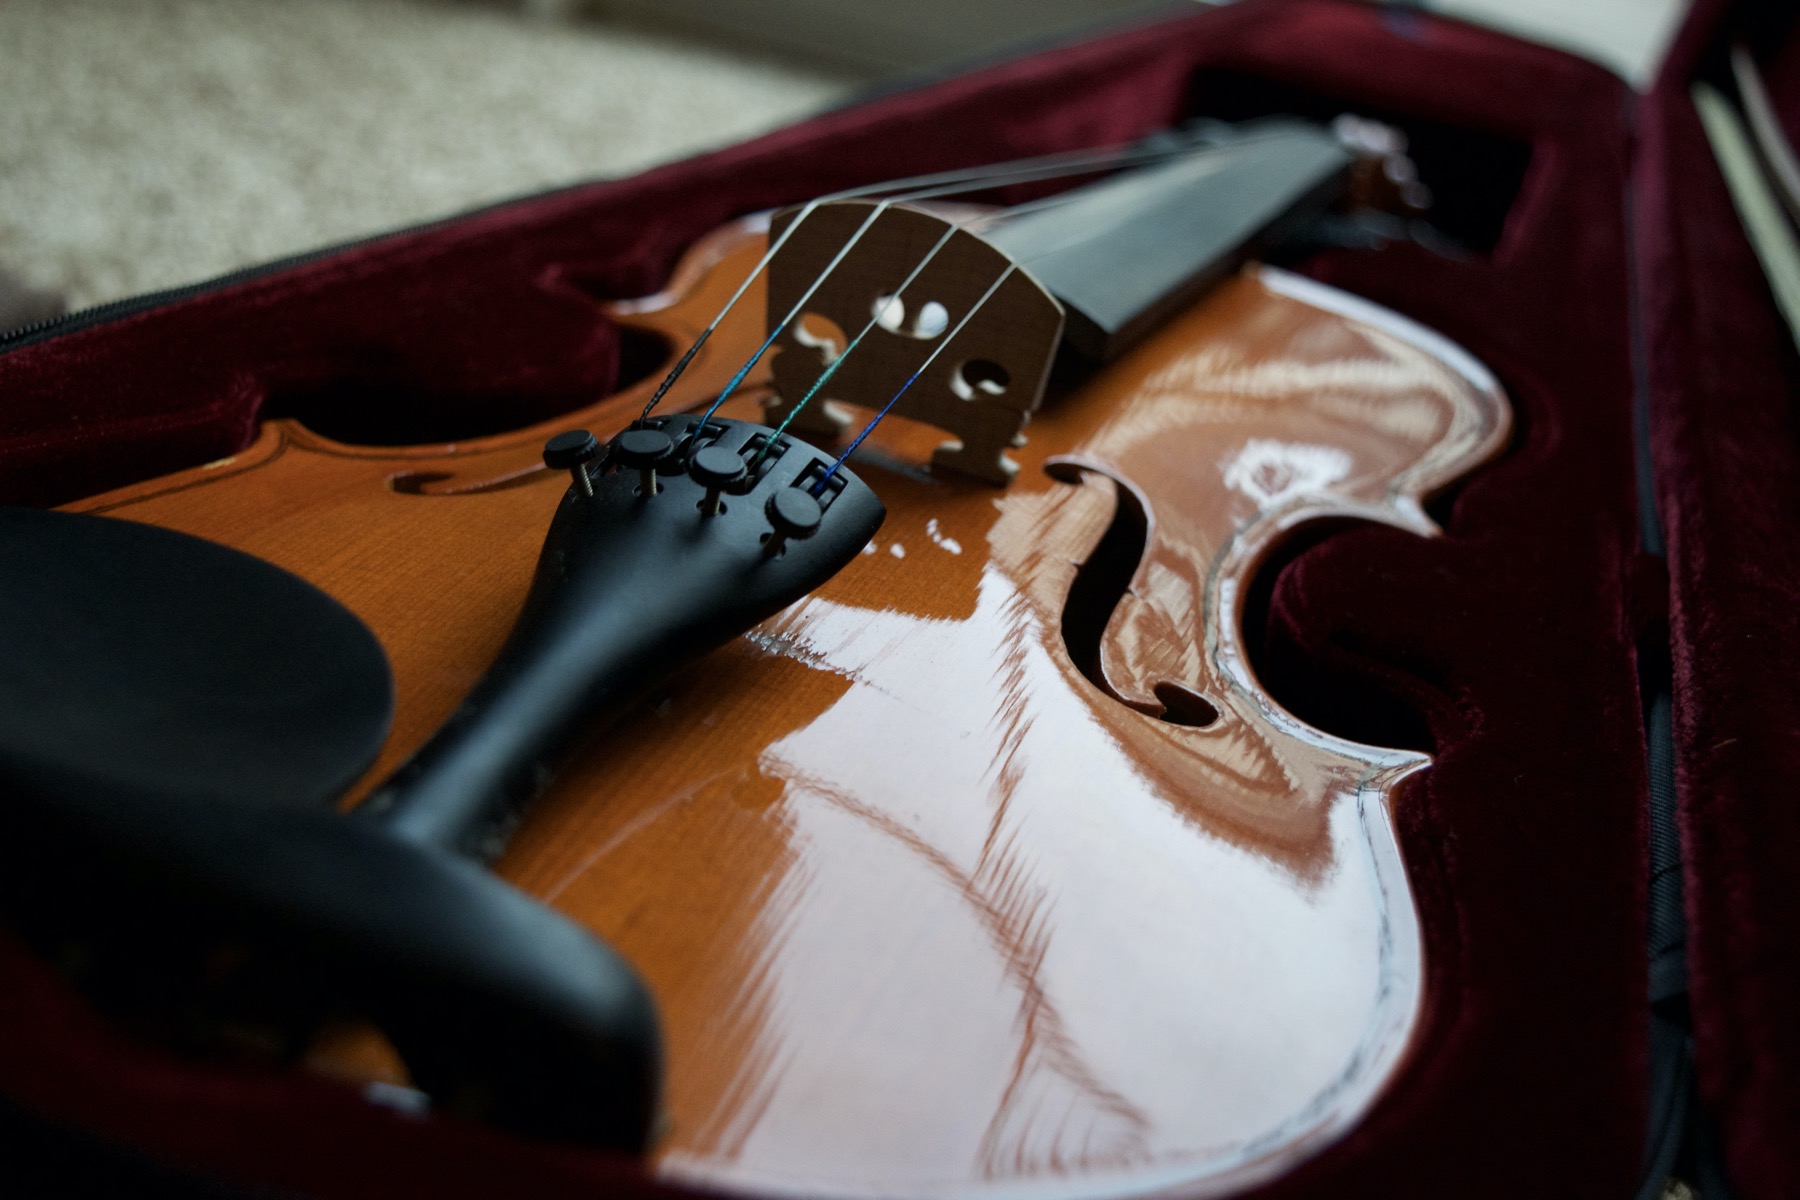 Violin laying in a case